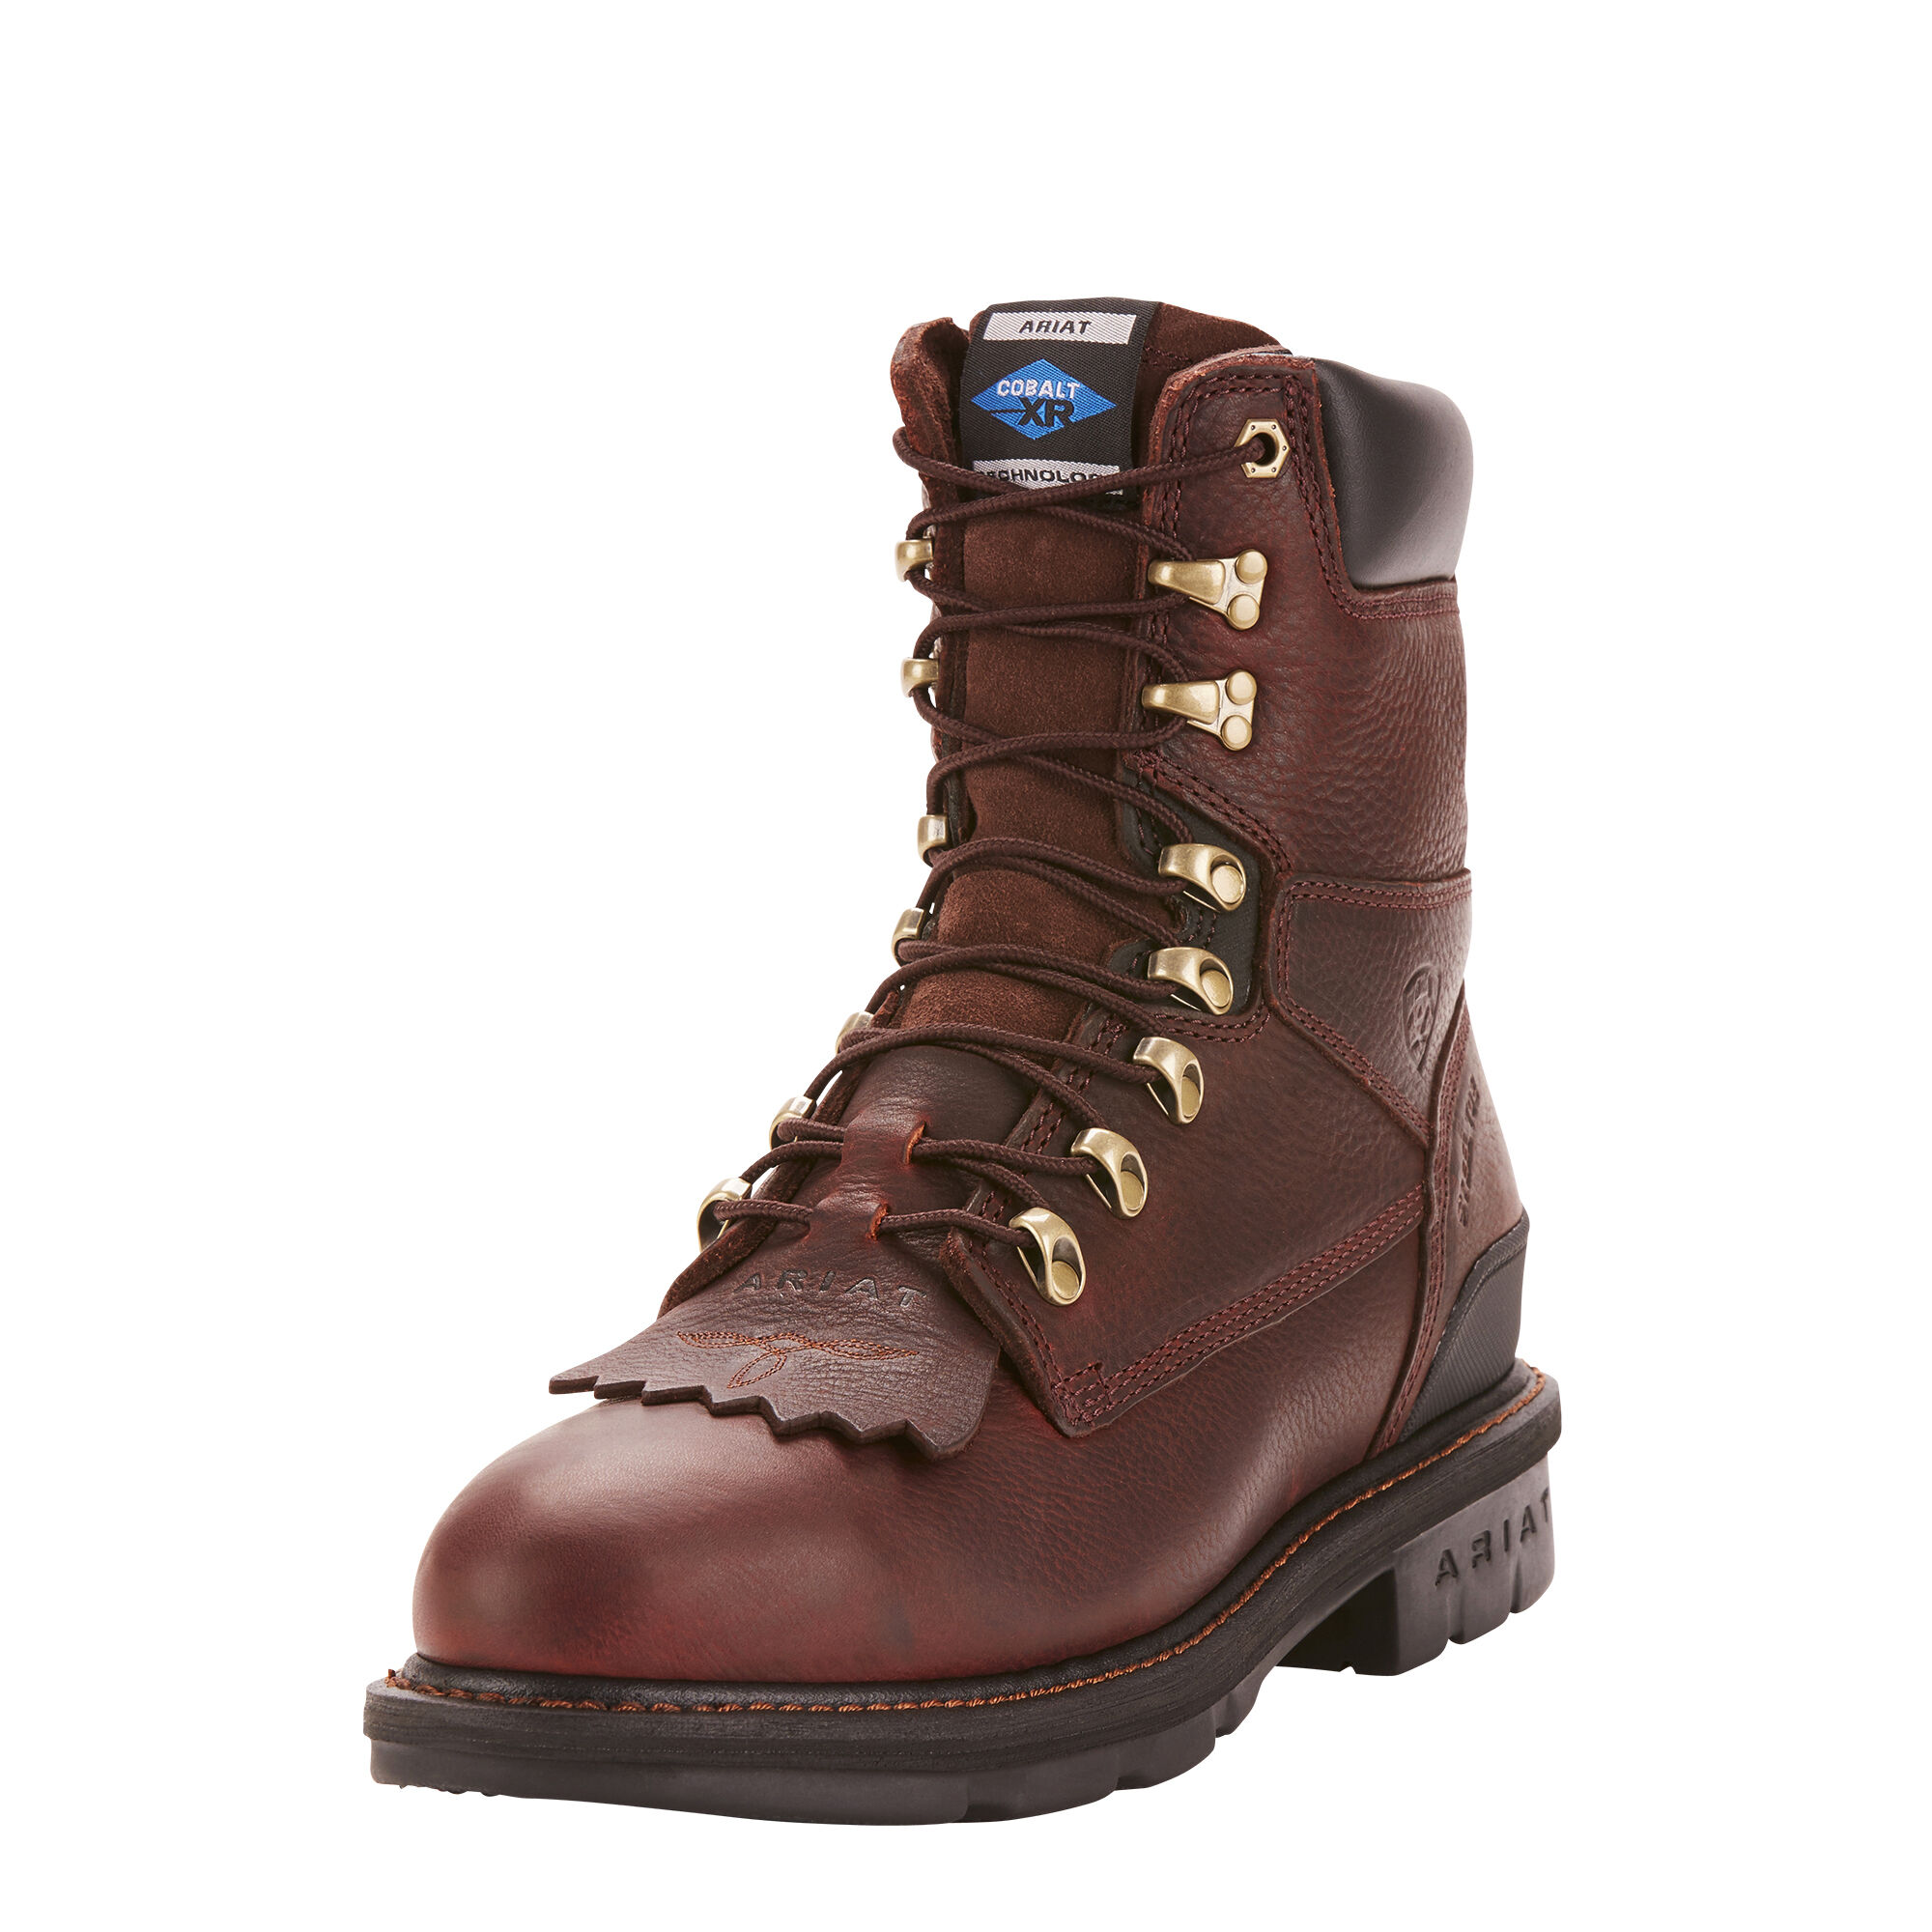 piers taylor blundstone boots